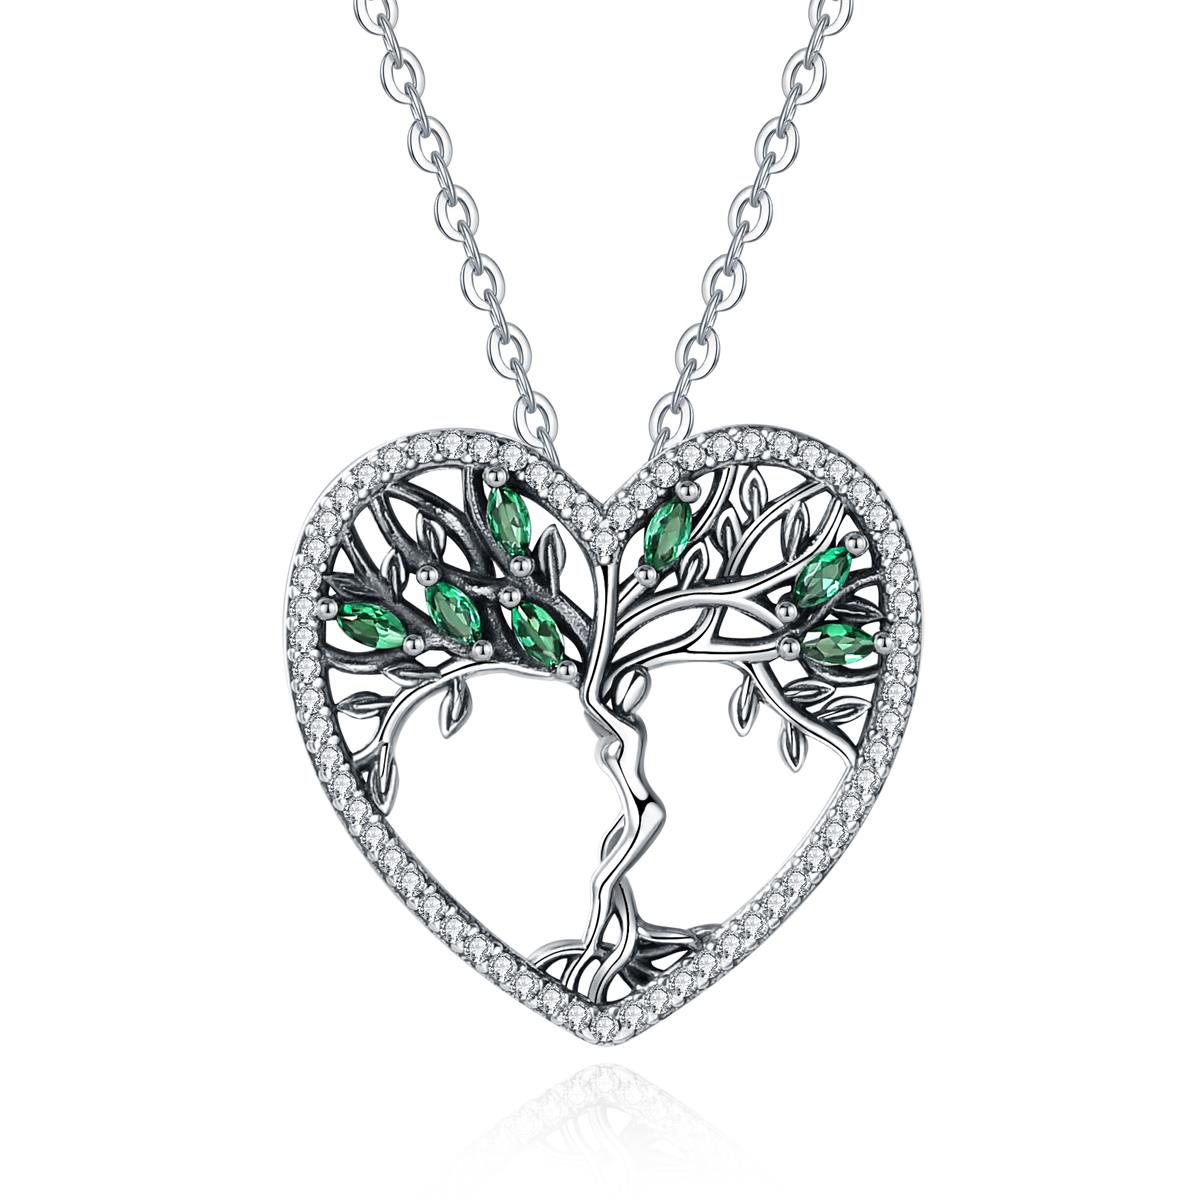 Merryshine Jewelry Oxidation Retro S925 Sterling Silver Heart Shape Tree of Life Charm Necklace